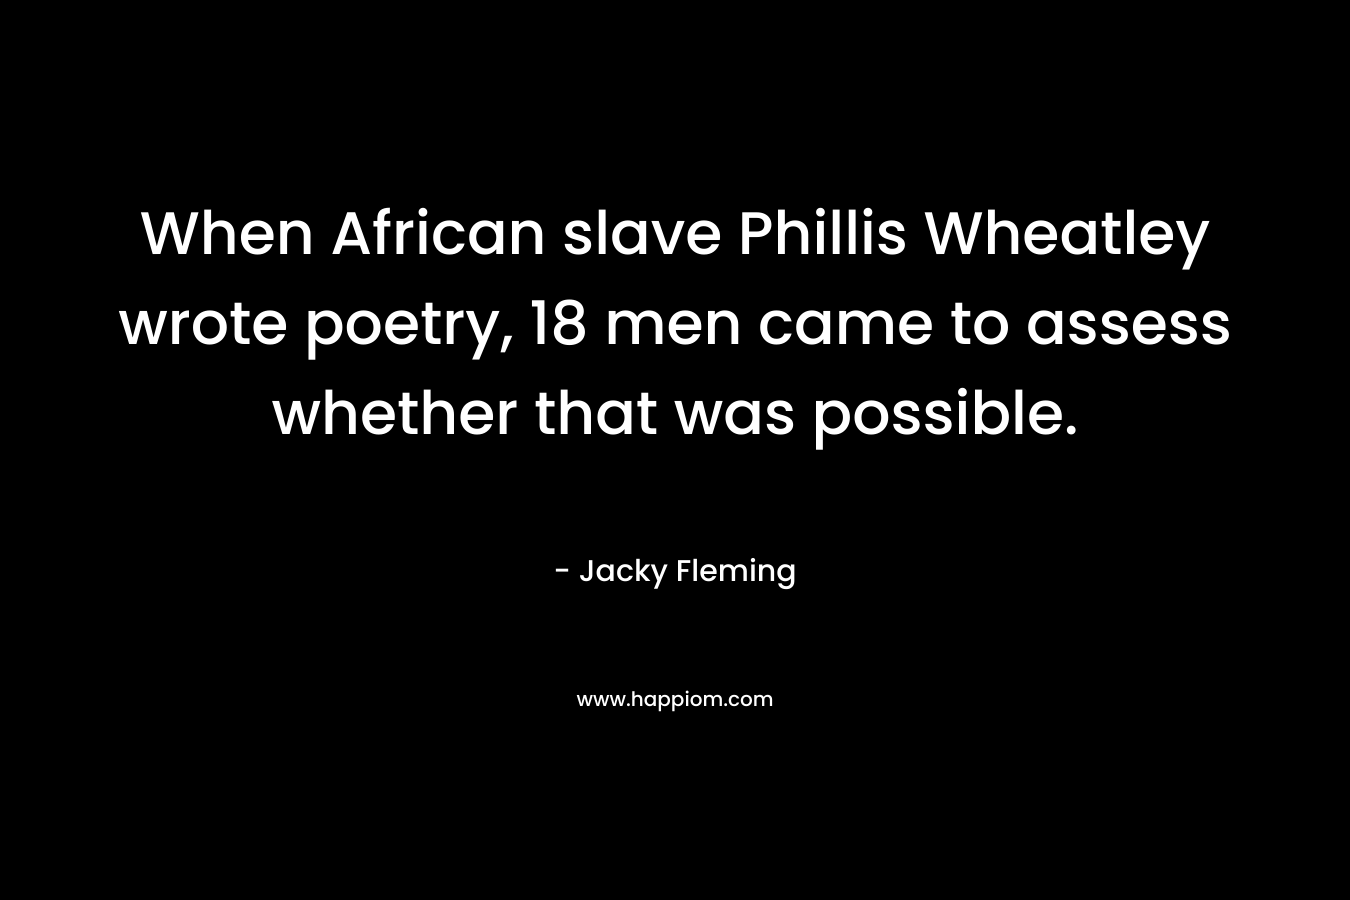 When African slave Phillis Wheatley wrote poetry, 18 men came to assess whether that was possible. – Jacky Fleming